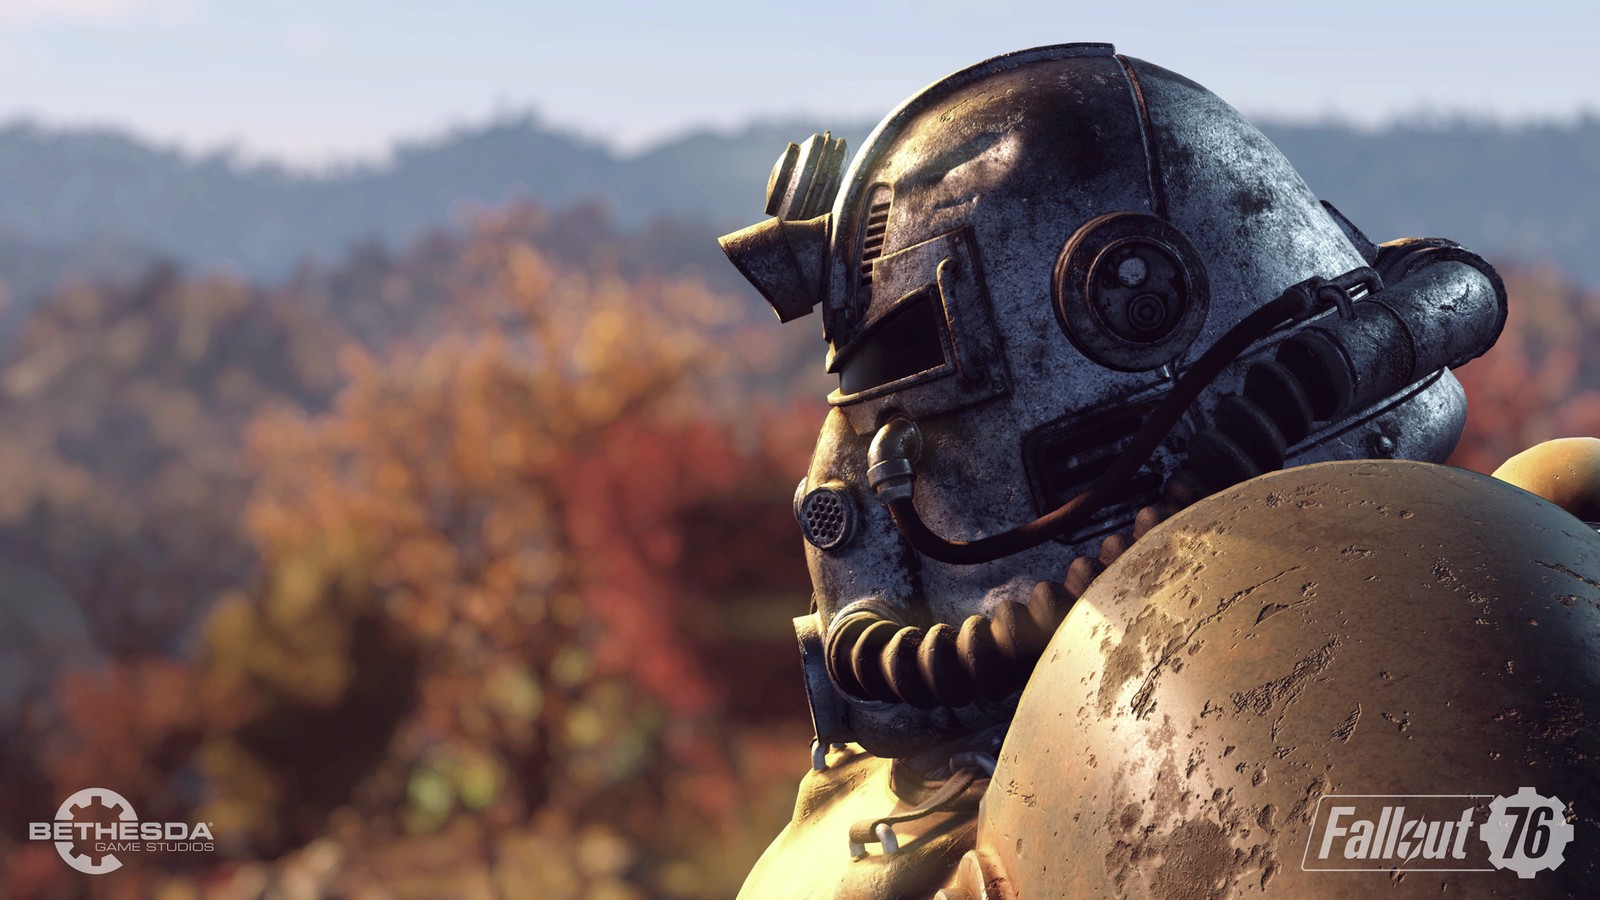 New Fallout 76 Details Unveiled Ahead Of Beta